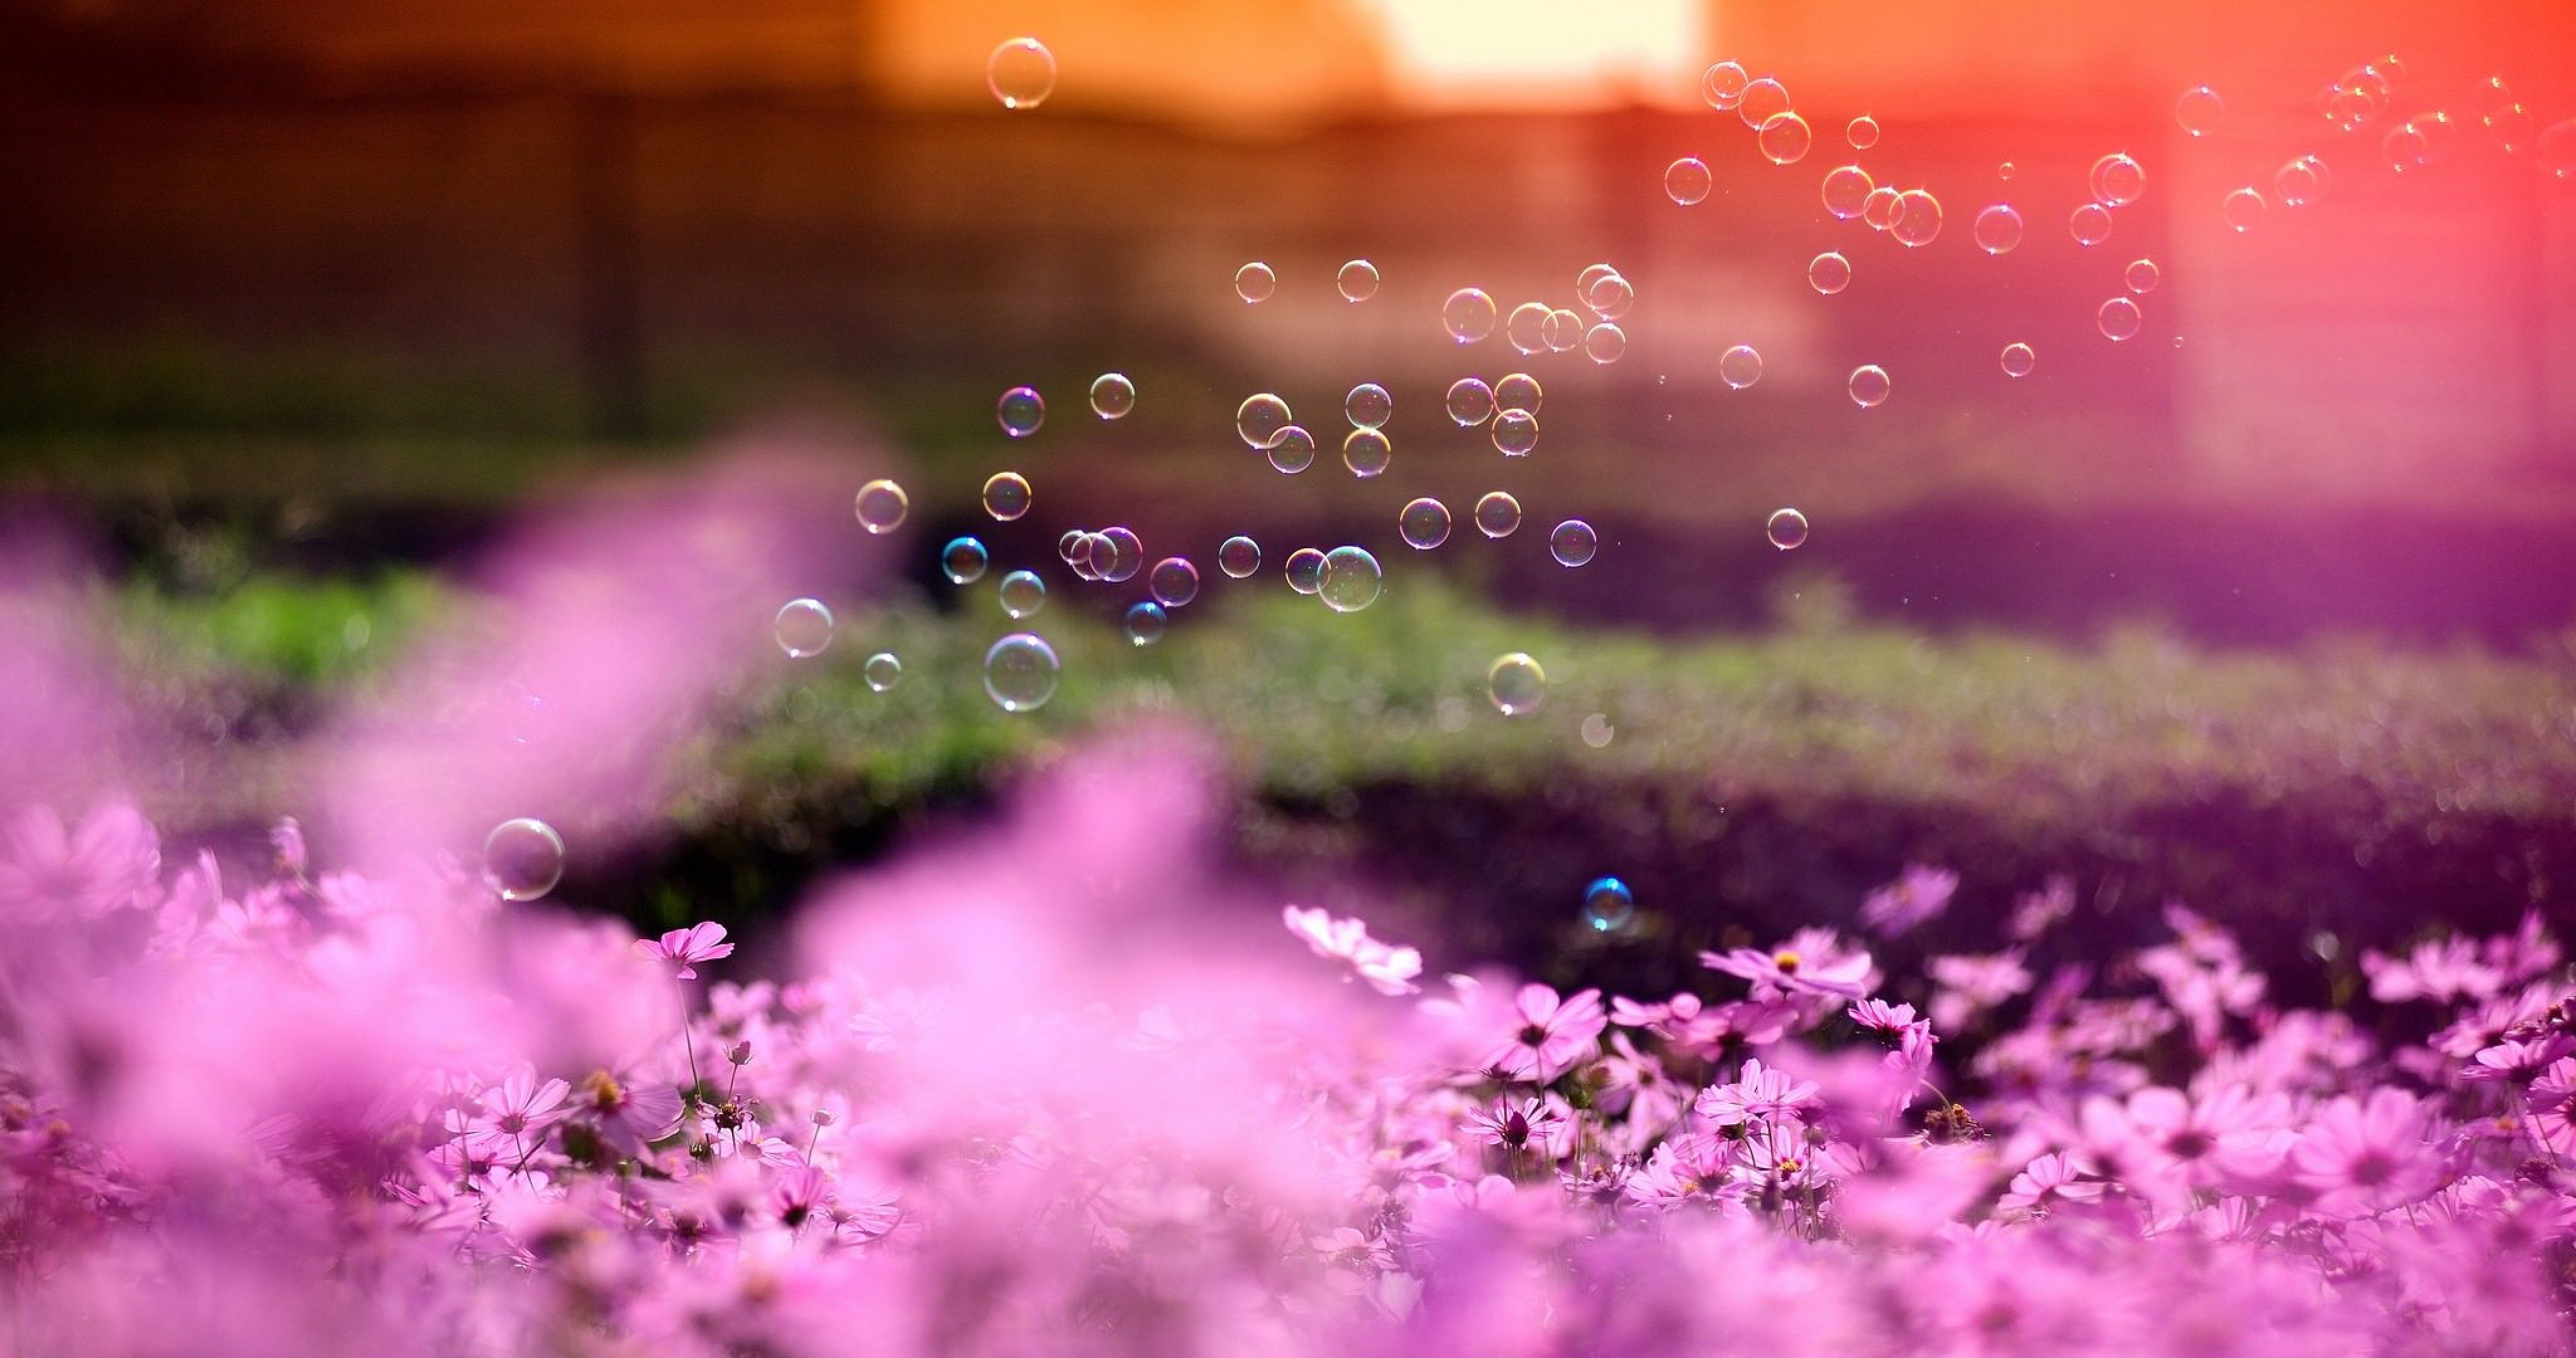 pink flowers and bubbles 4k ultra HD wallpaper High quality walls